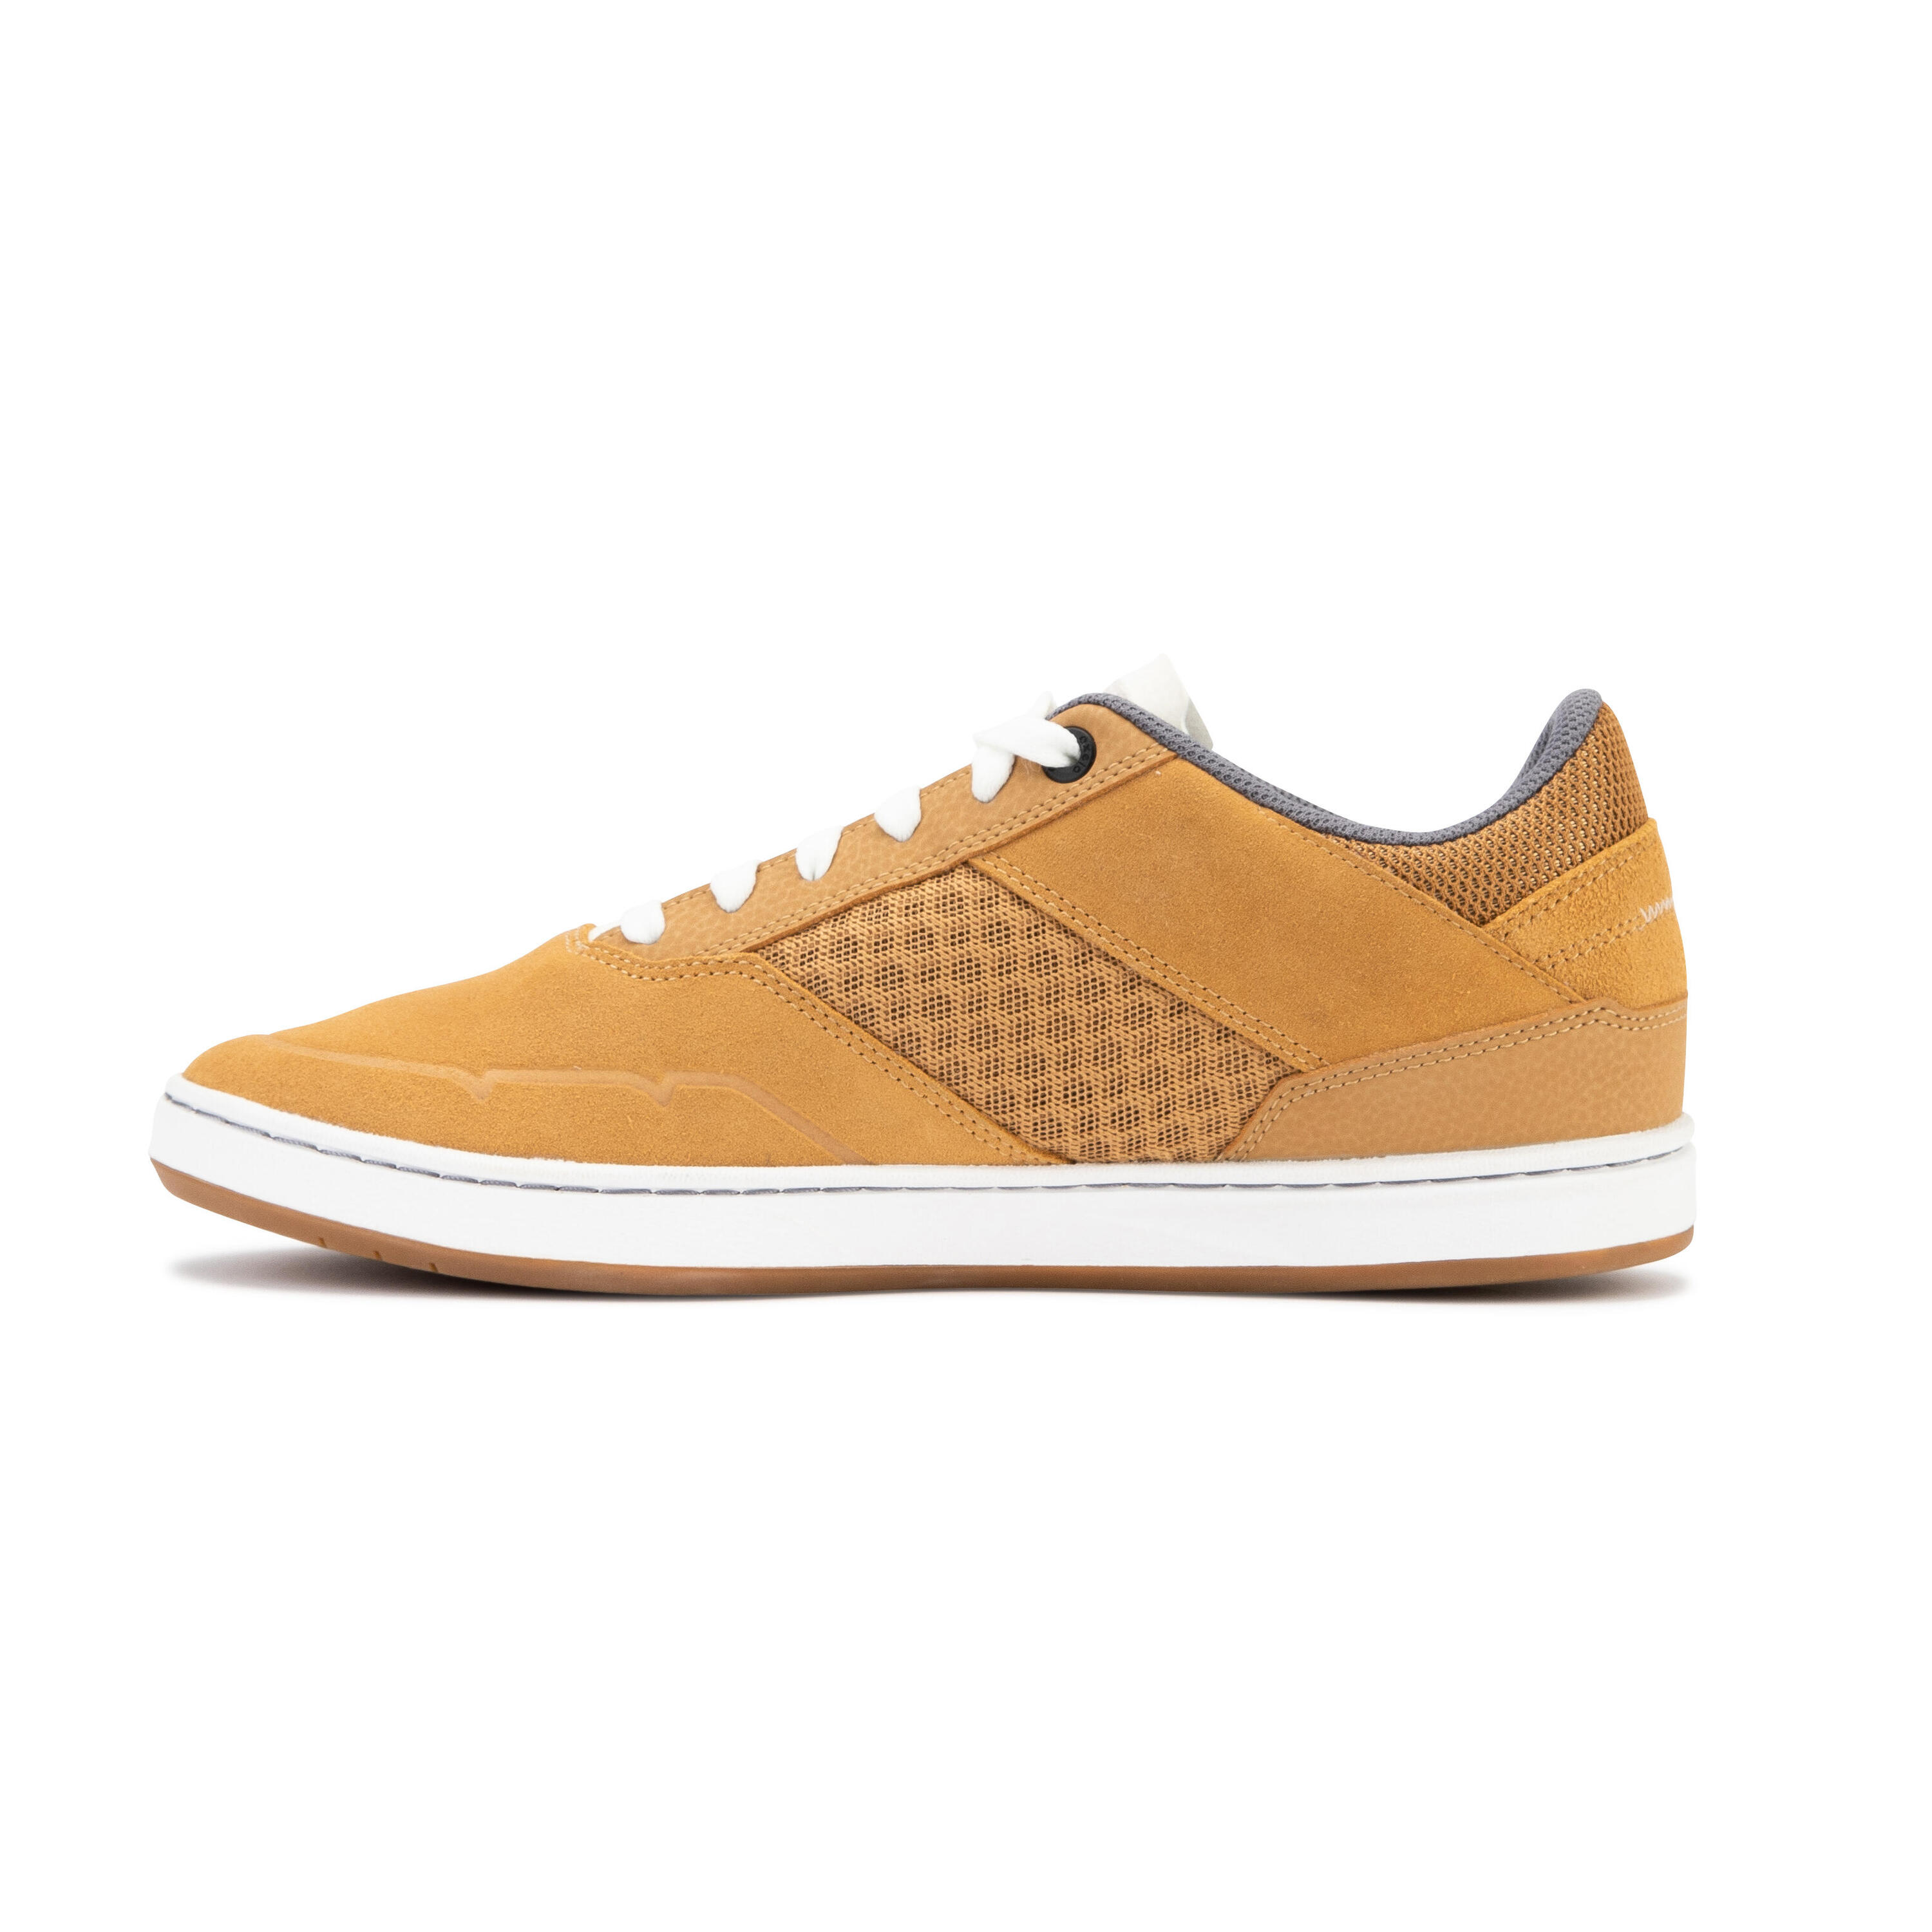 Adult Low-Top Cupsole Skate Shoes Crush 500 - Ochre/White 14/16